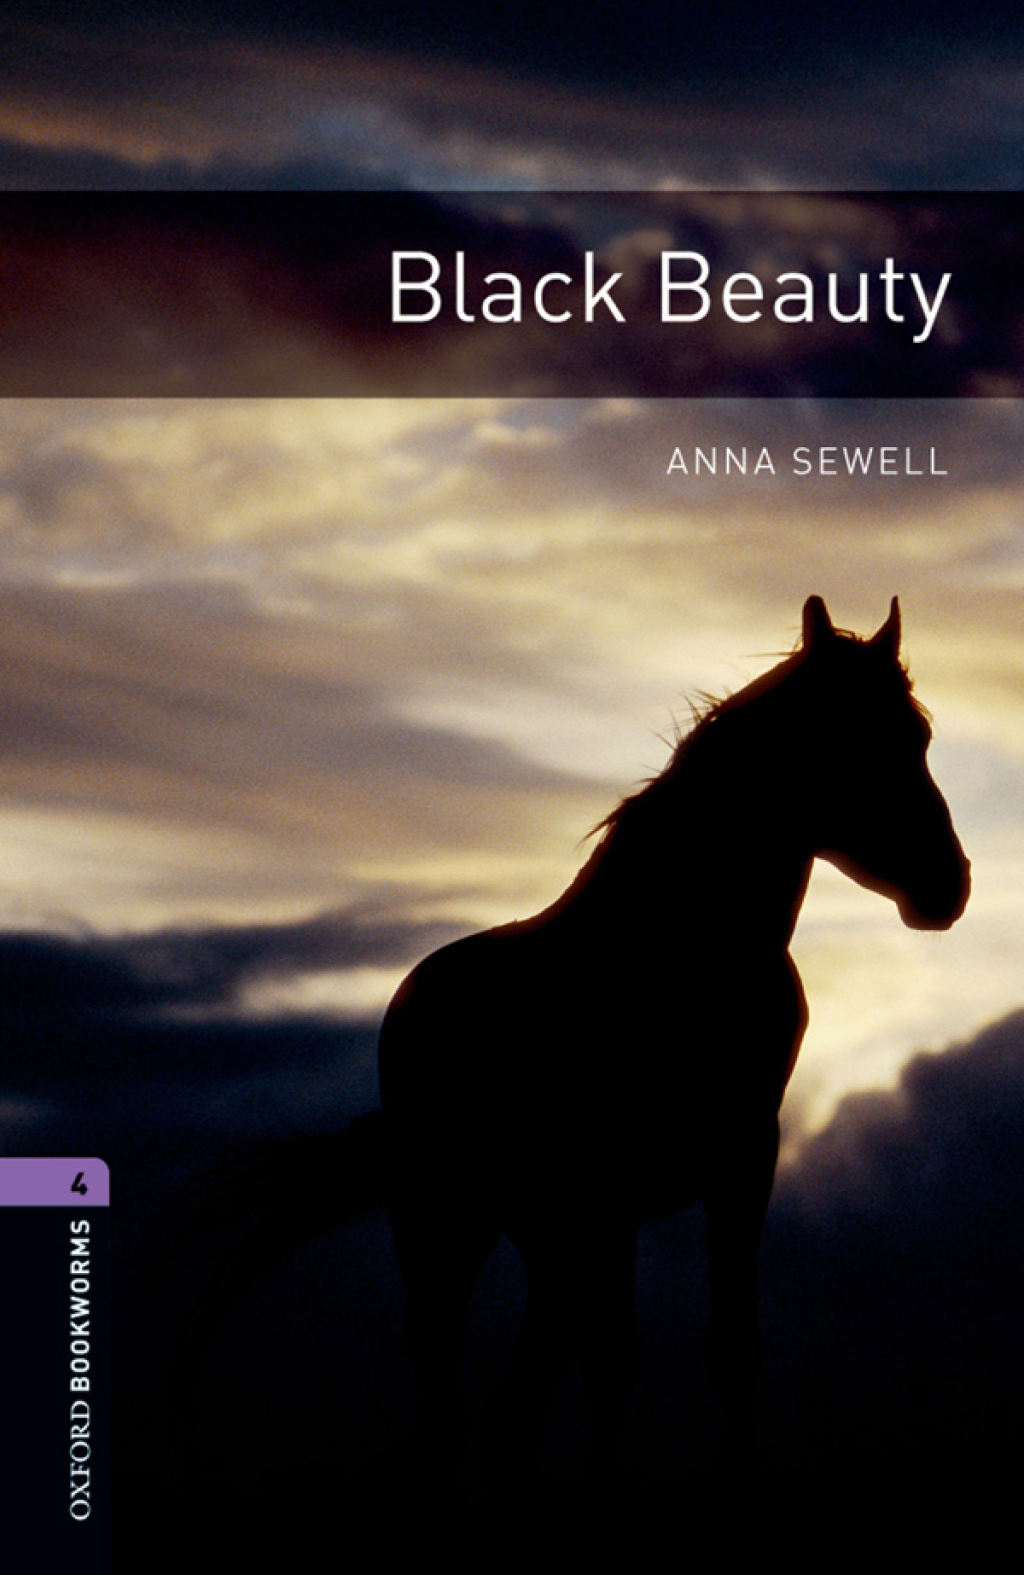 Black Beauty Level 4 Oxford Bookworms Library - 3rd Edition (eBook Rental)